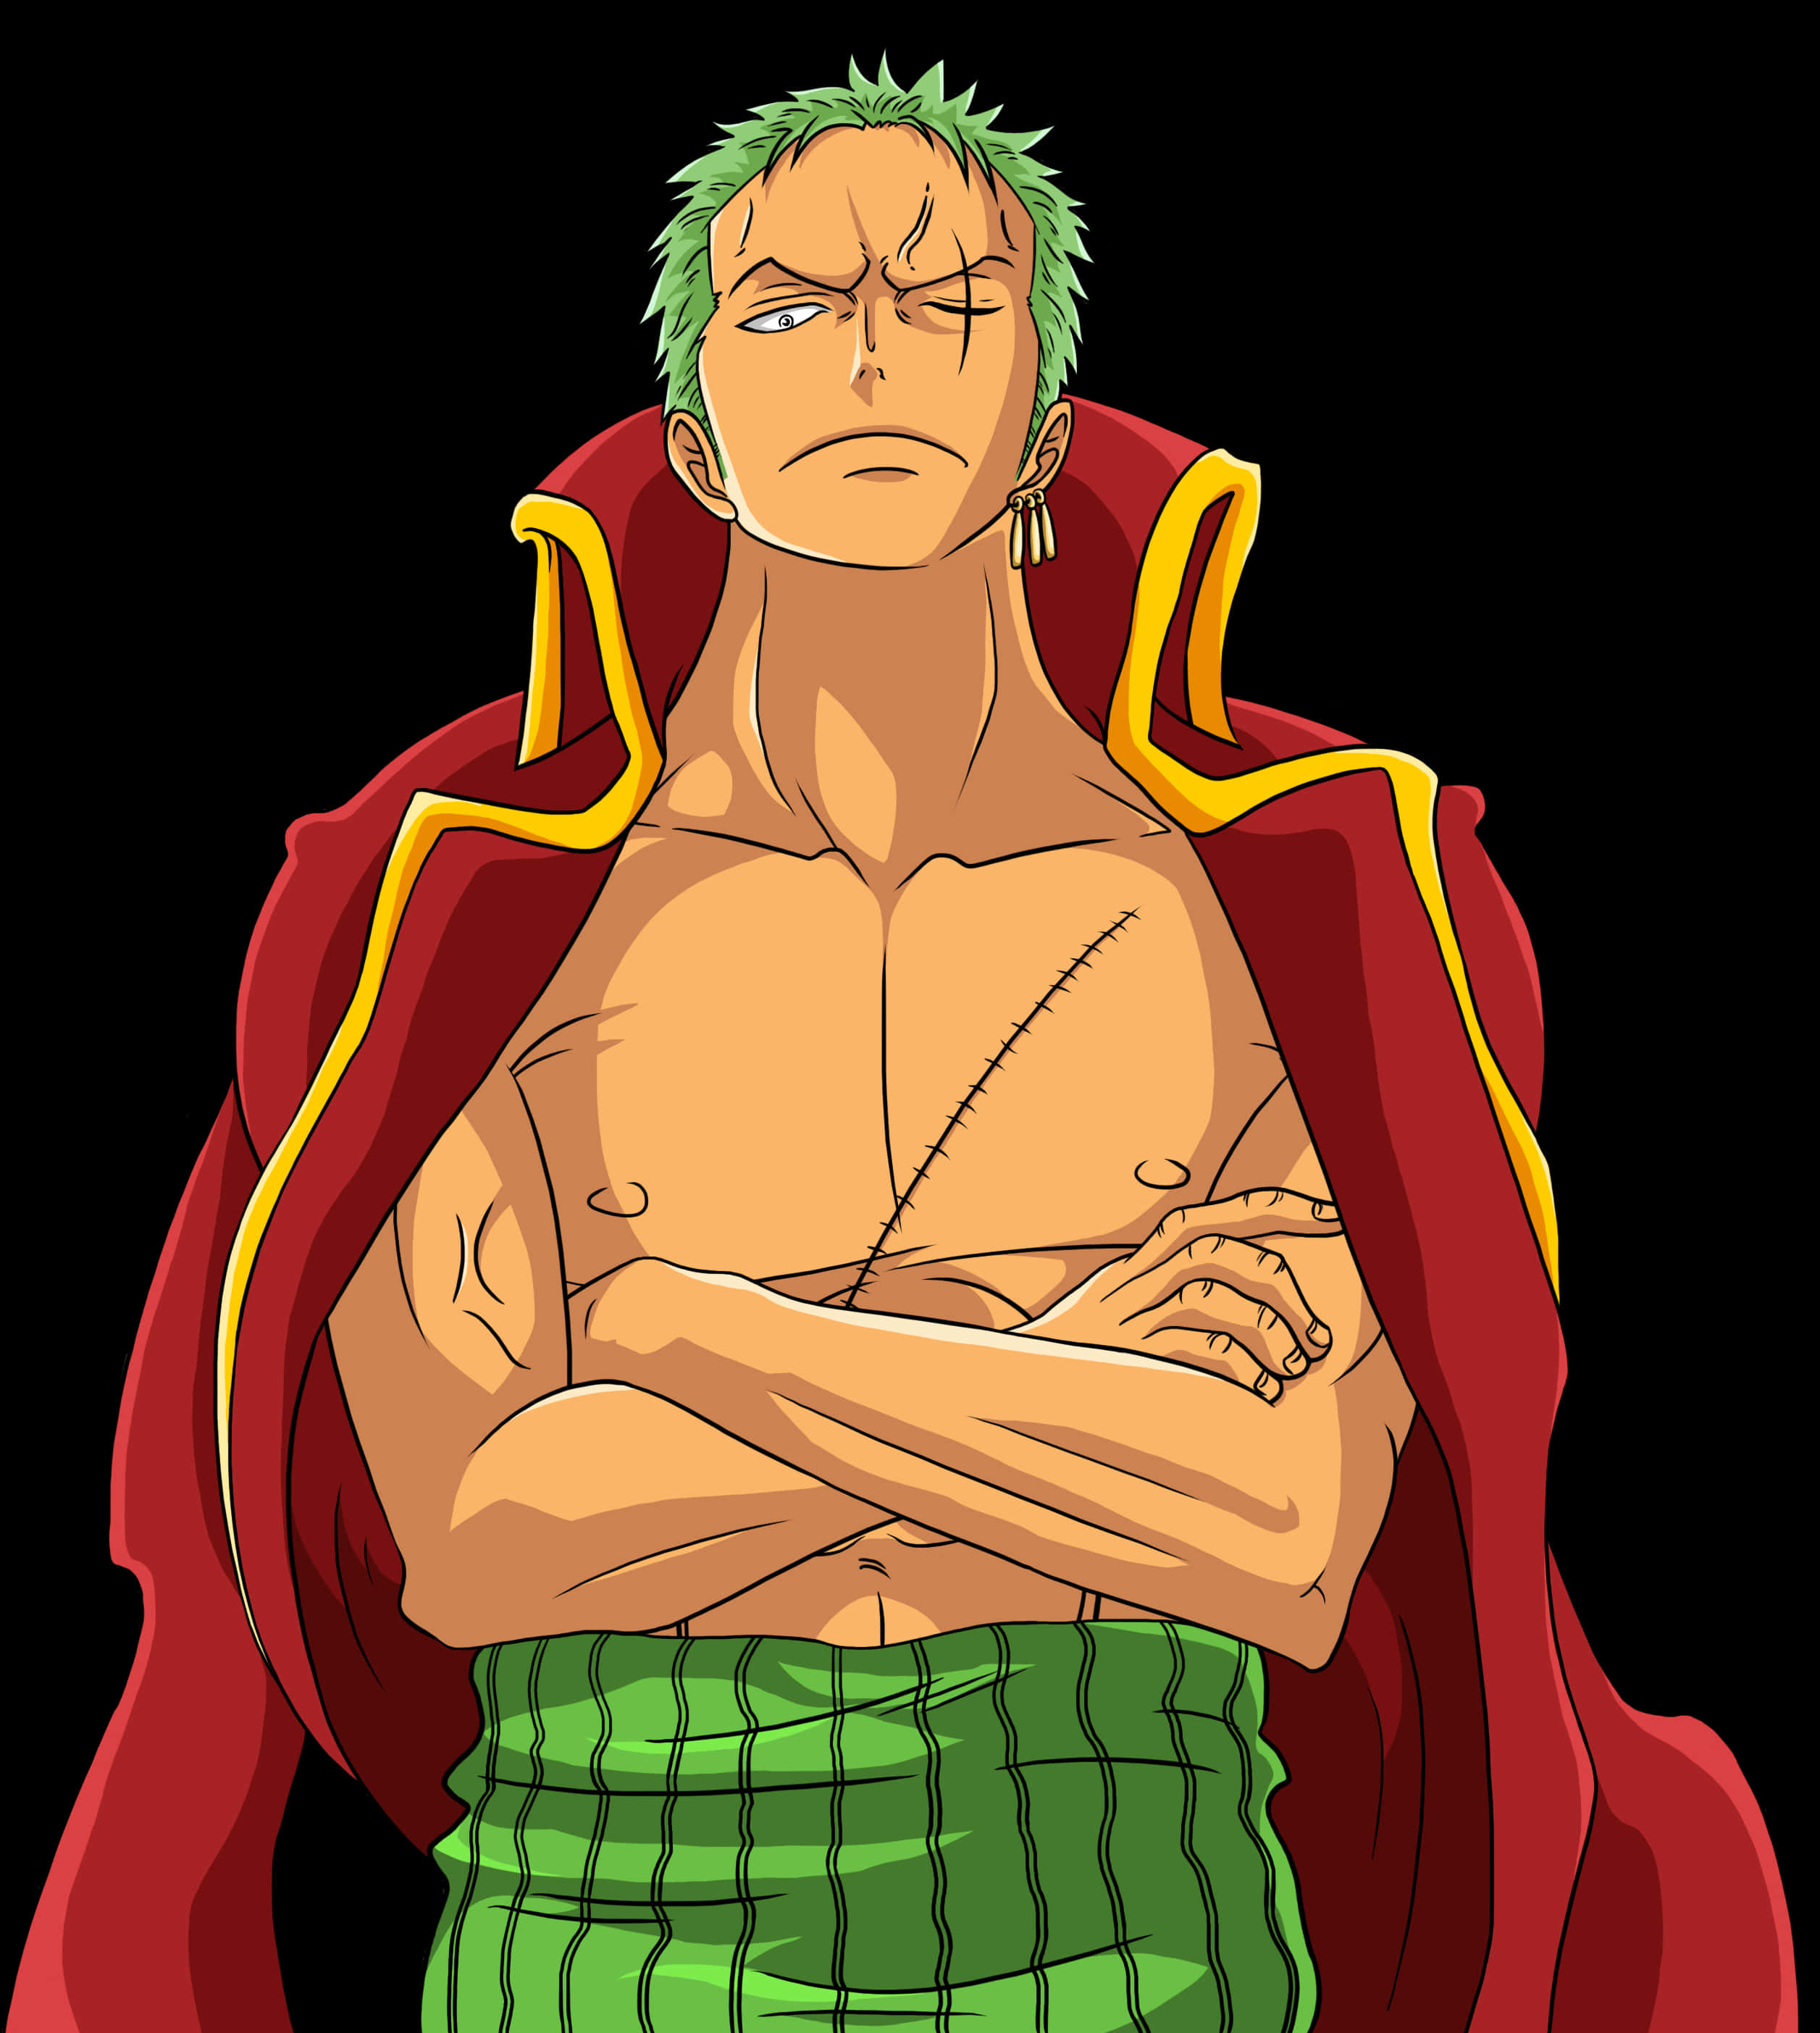 A Cartoon Of A Man With Green Hair And A Red Cape